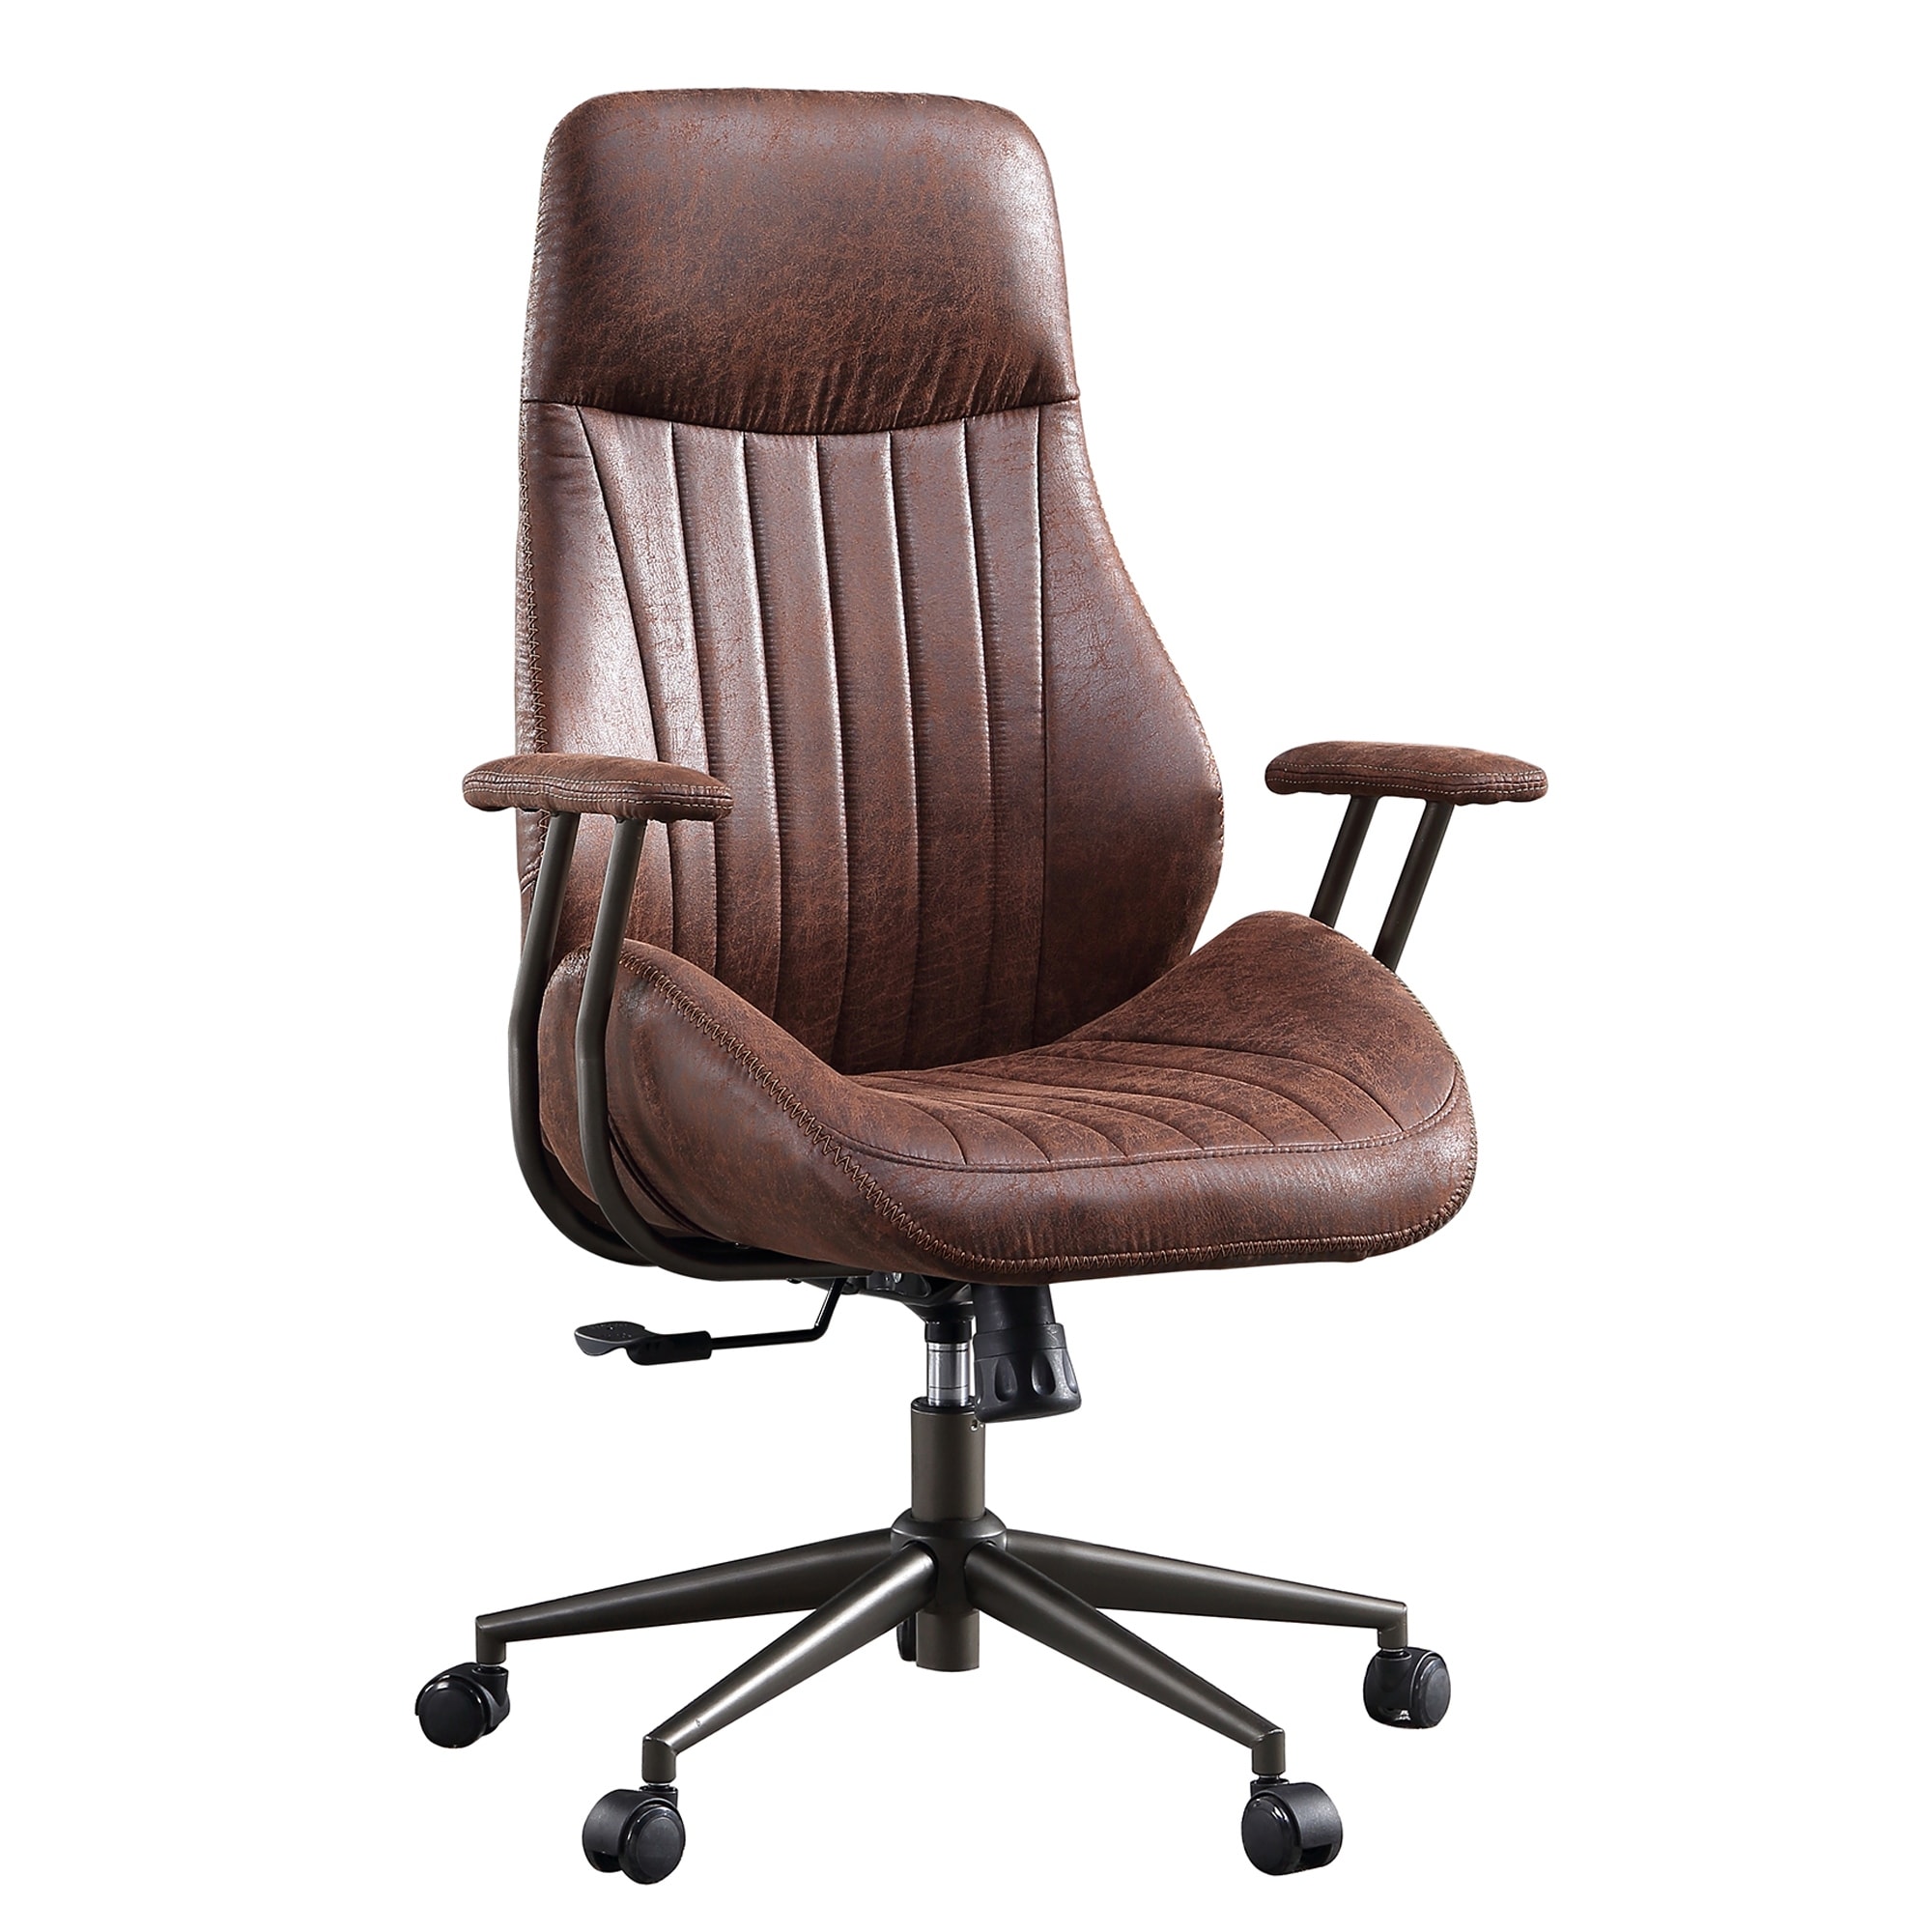 Allwex OL Brown Suede Fabric Ergonomic Swivel Office Chair Task Chair with  Recliner High Back Lumbar Support KL600 - The Home Depot